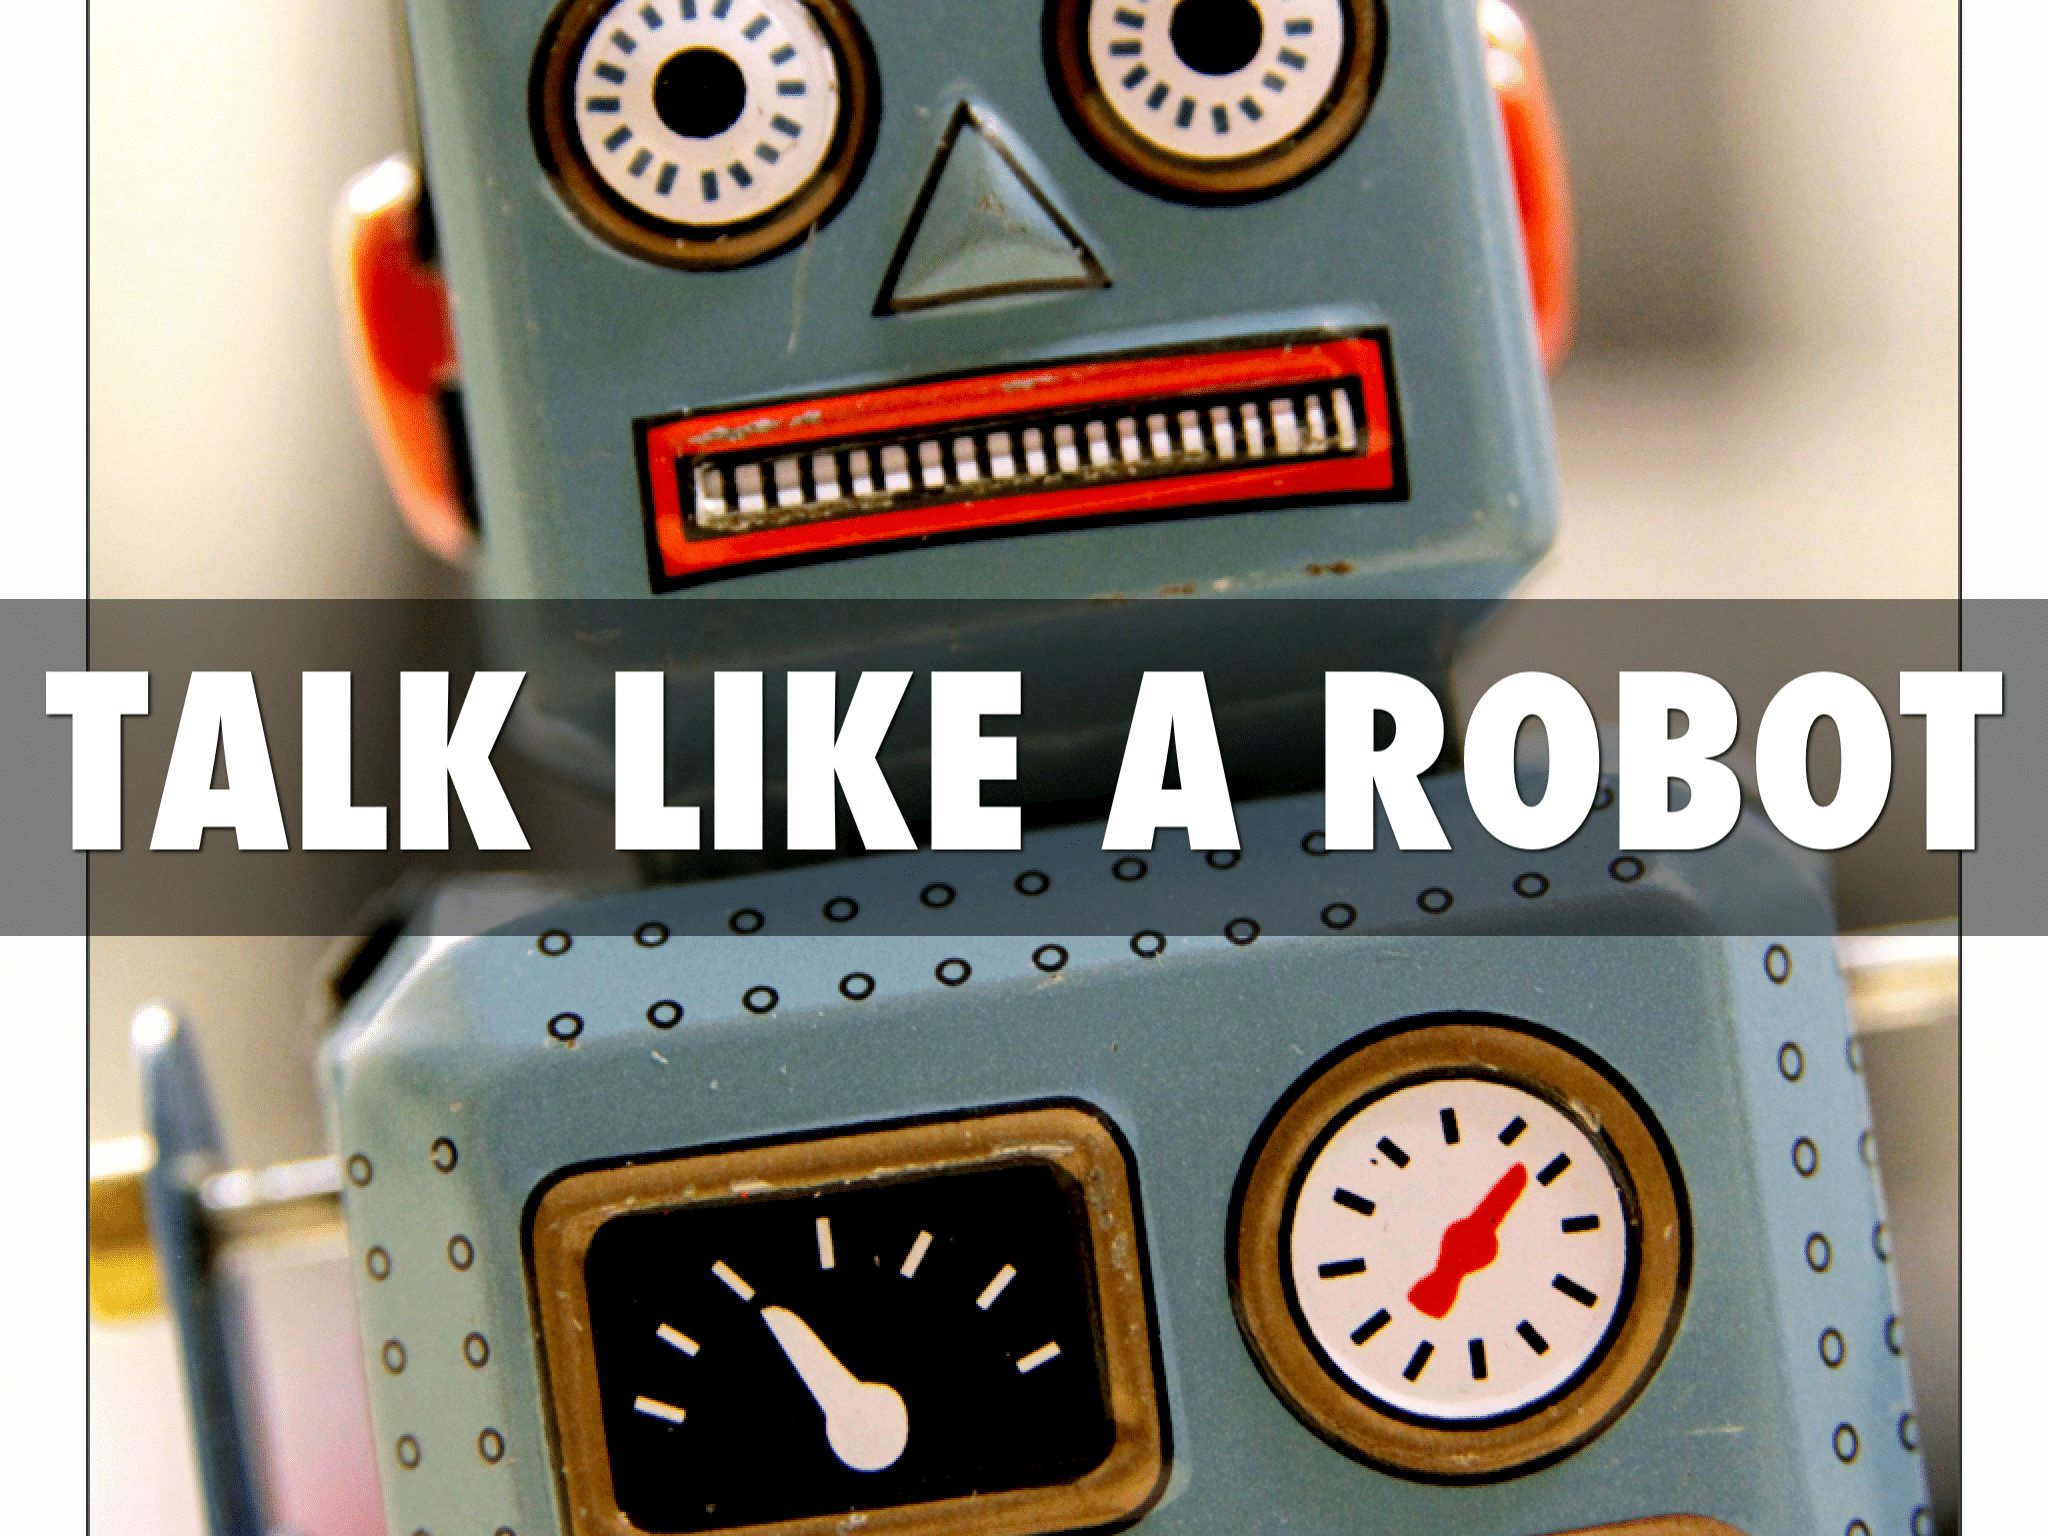 is there any app for mac that i can talk to like real person to a robot